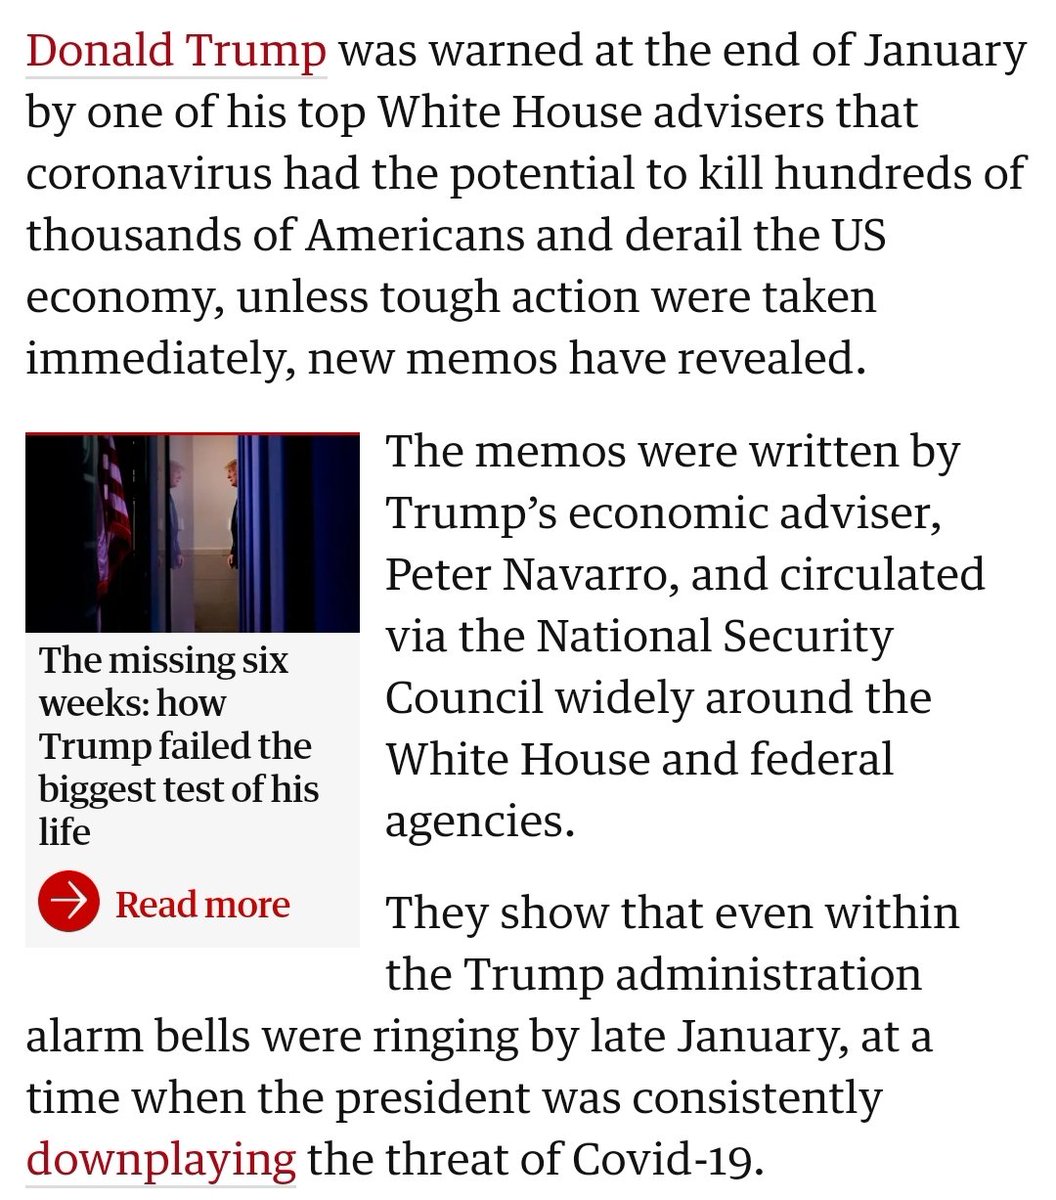 At the end of January, Trump's economic adviser Peter Navarro circulated around the White House and federal agencies that unless U.S takes action, hundreds of thousands of Americans will die! Another memo was sent in February as well